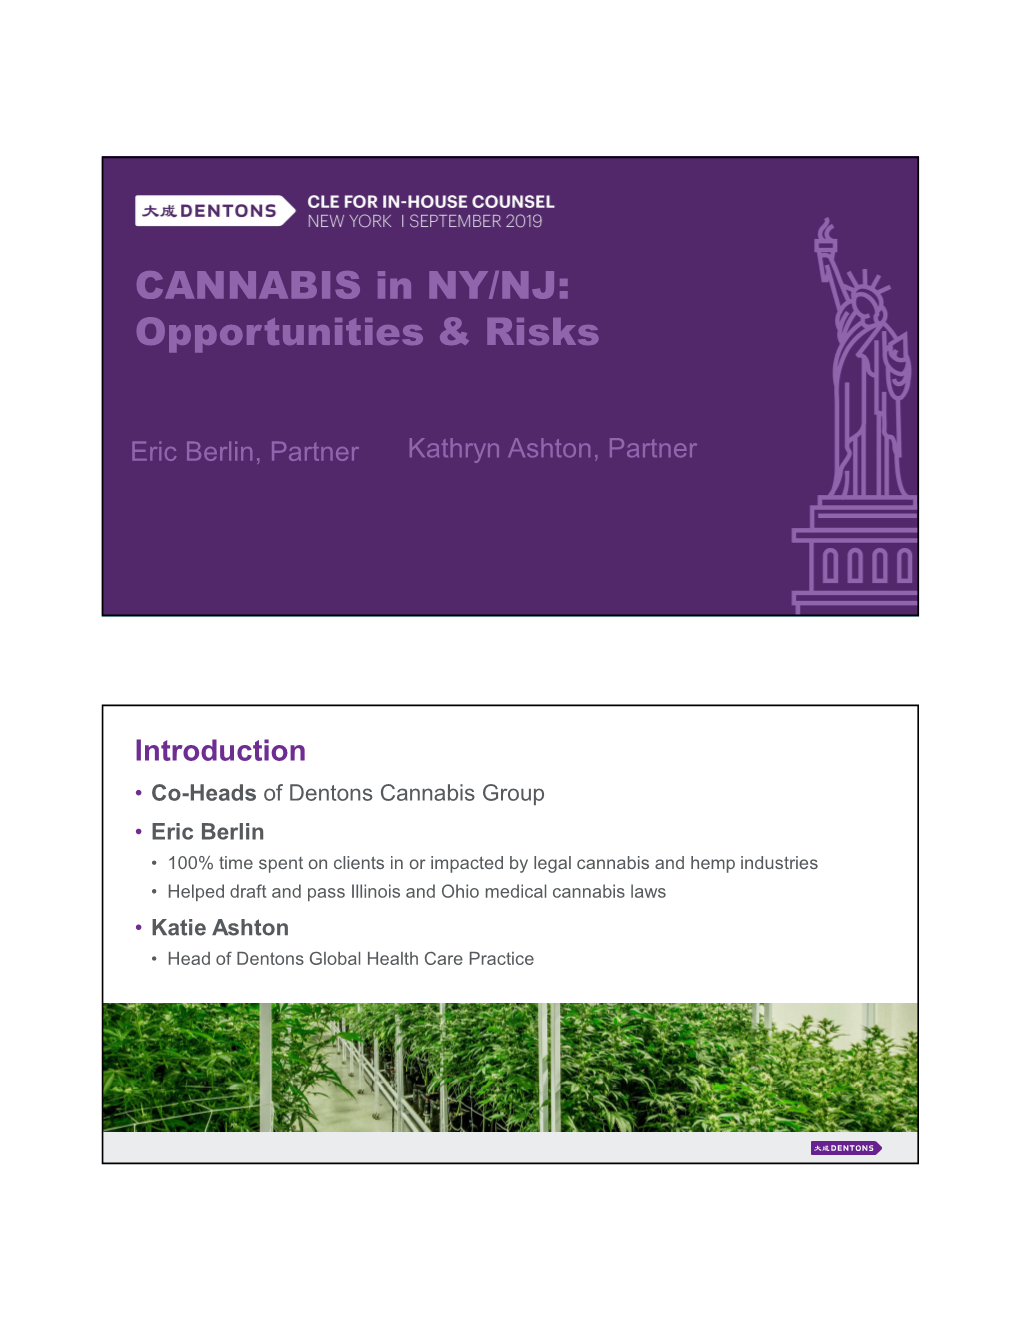 CANNABIS in NY/NJ: Opportunities & Risks